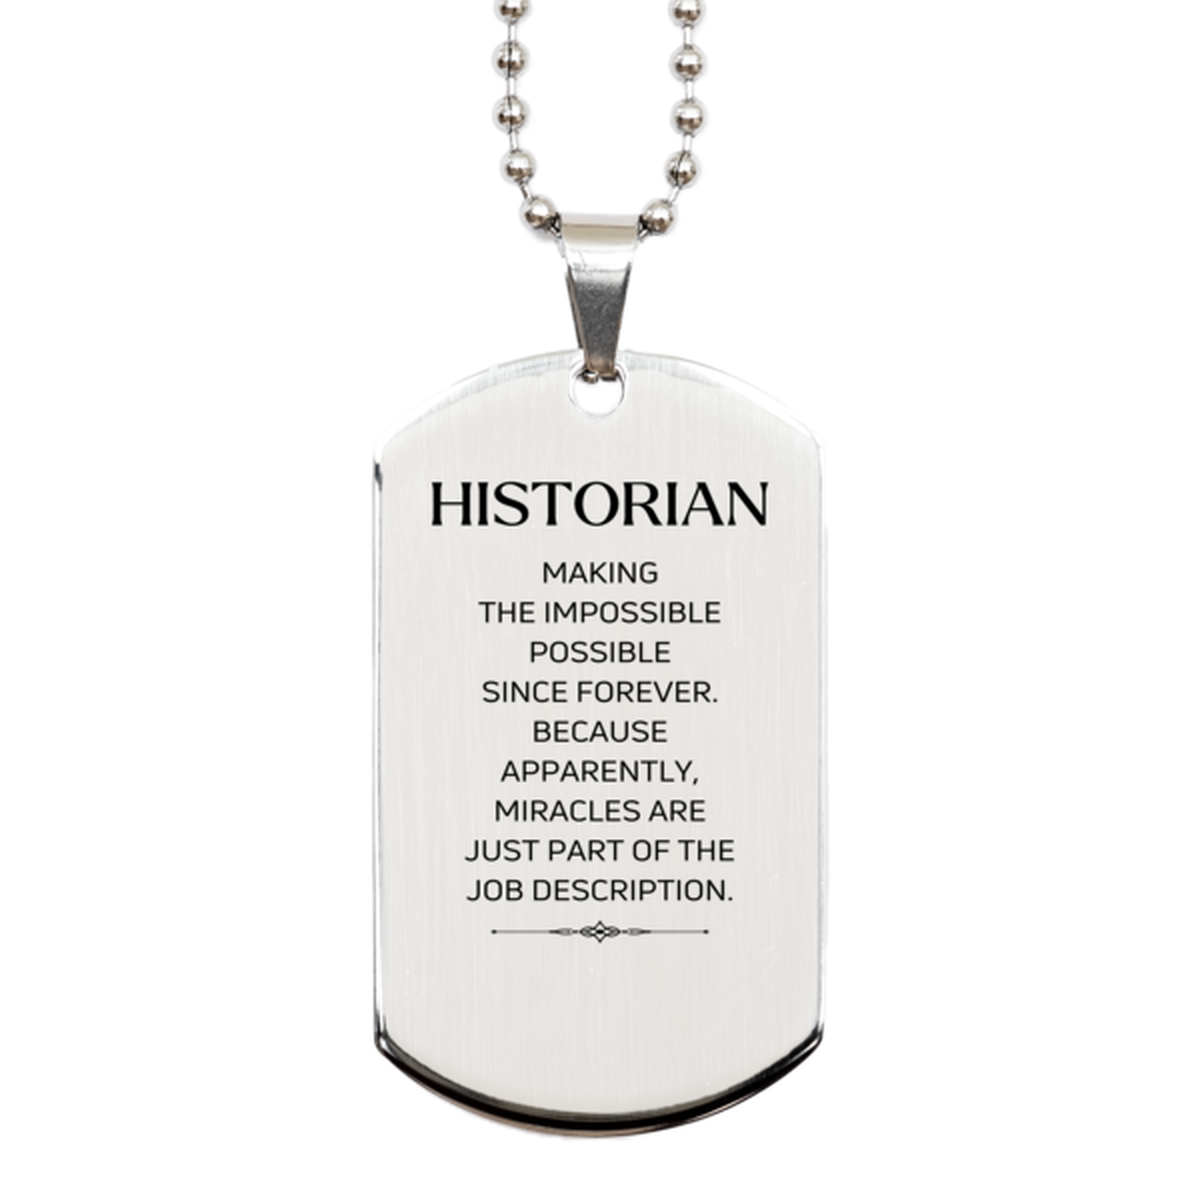 Funny Historian Gifts, Miracles are just part of the job description, Inspirational Birthday Silver Dog Tag For Historian, Men, Women, Coworkers, Friends, Boss